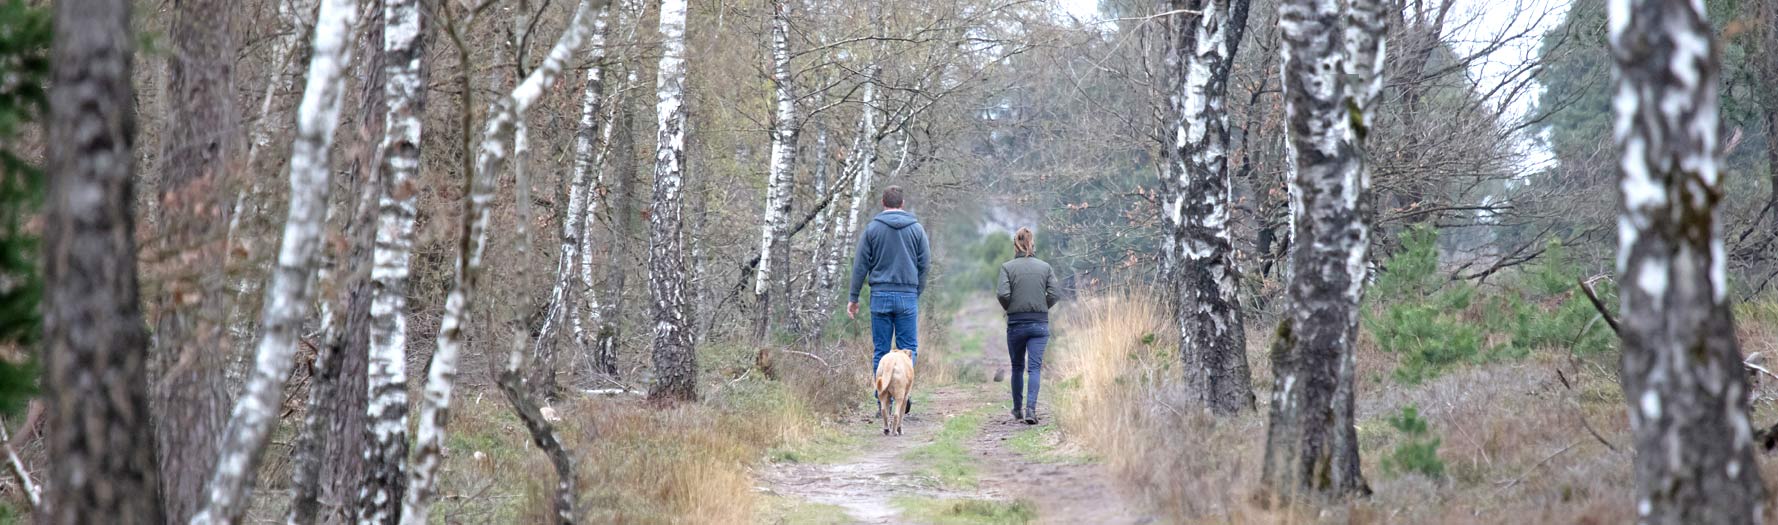 family walking in woods with dog enjoying their trail